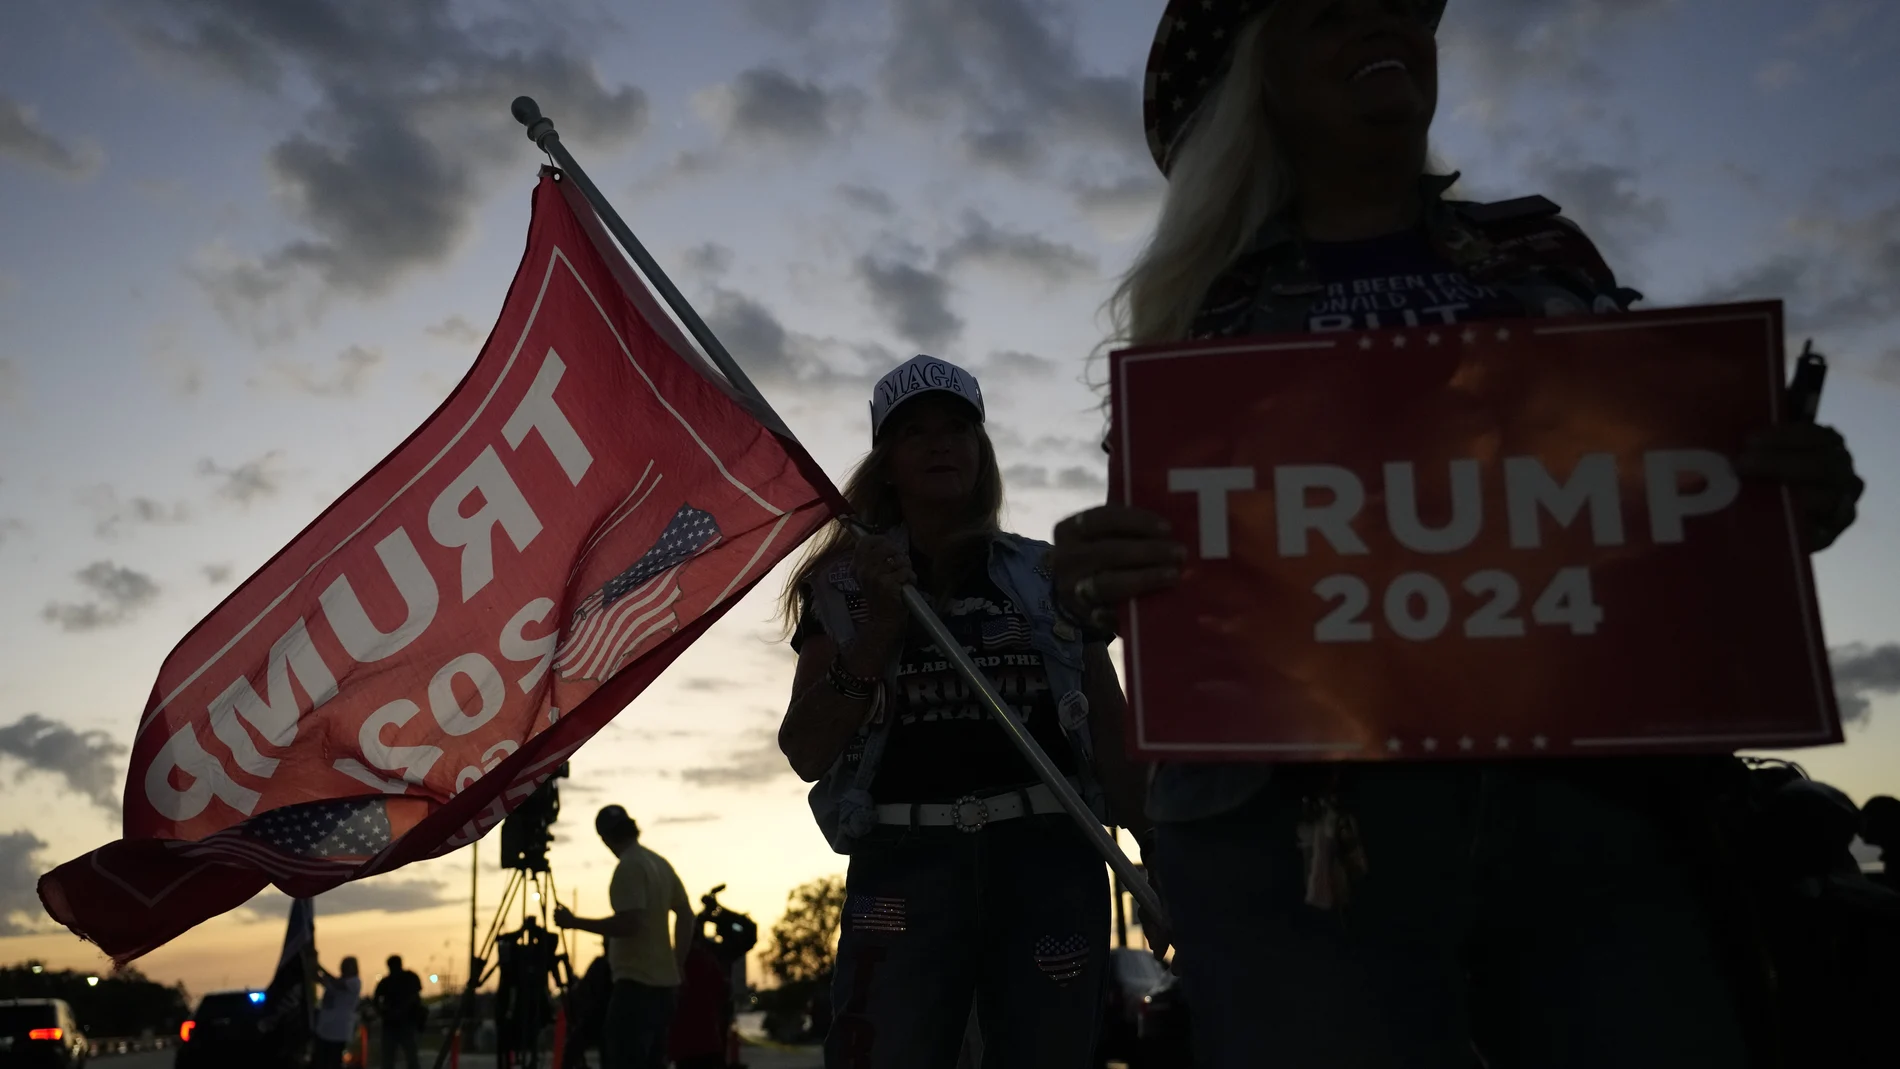 Kathy Clark of Lantana, right, and "Maga" Mary Kelley show their support for former President Donald Trump after the news that Trump has been indicted by a Manhattan grand jury, Thursday, March 30, 2023, near Trump's Mar-a-Lago estate in Palm Beach, Fla.